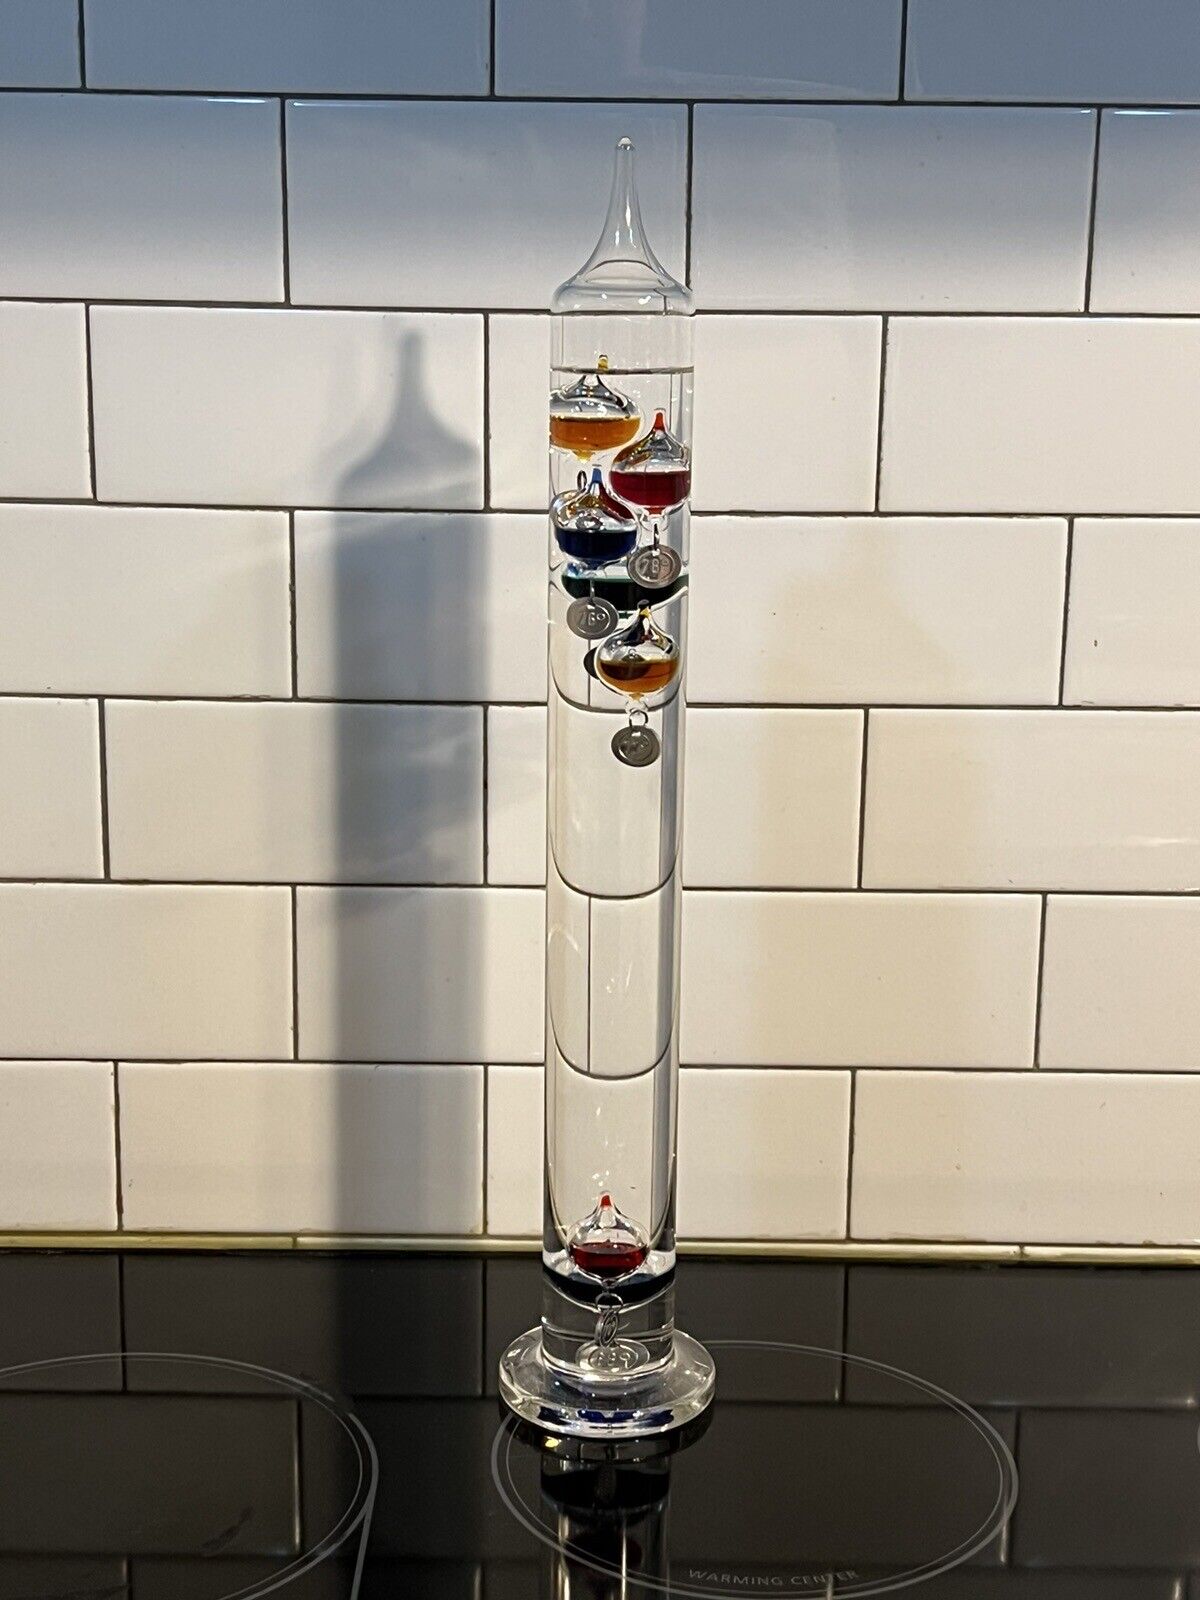 Galileo Glass Thermometer Large 17 Inches Tall Multicolored Bubbles Unmarked